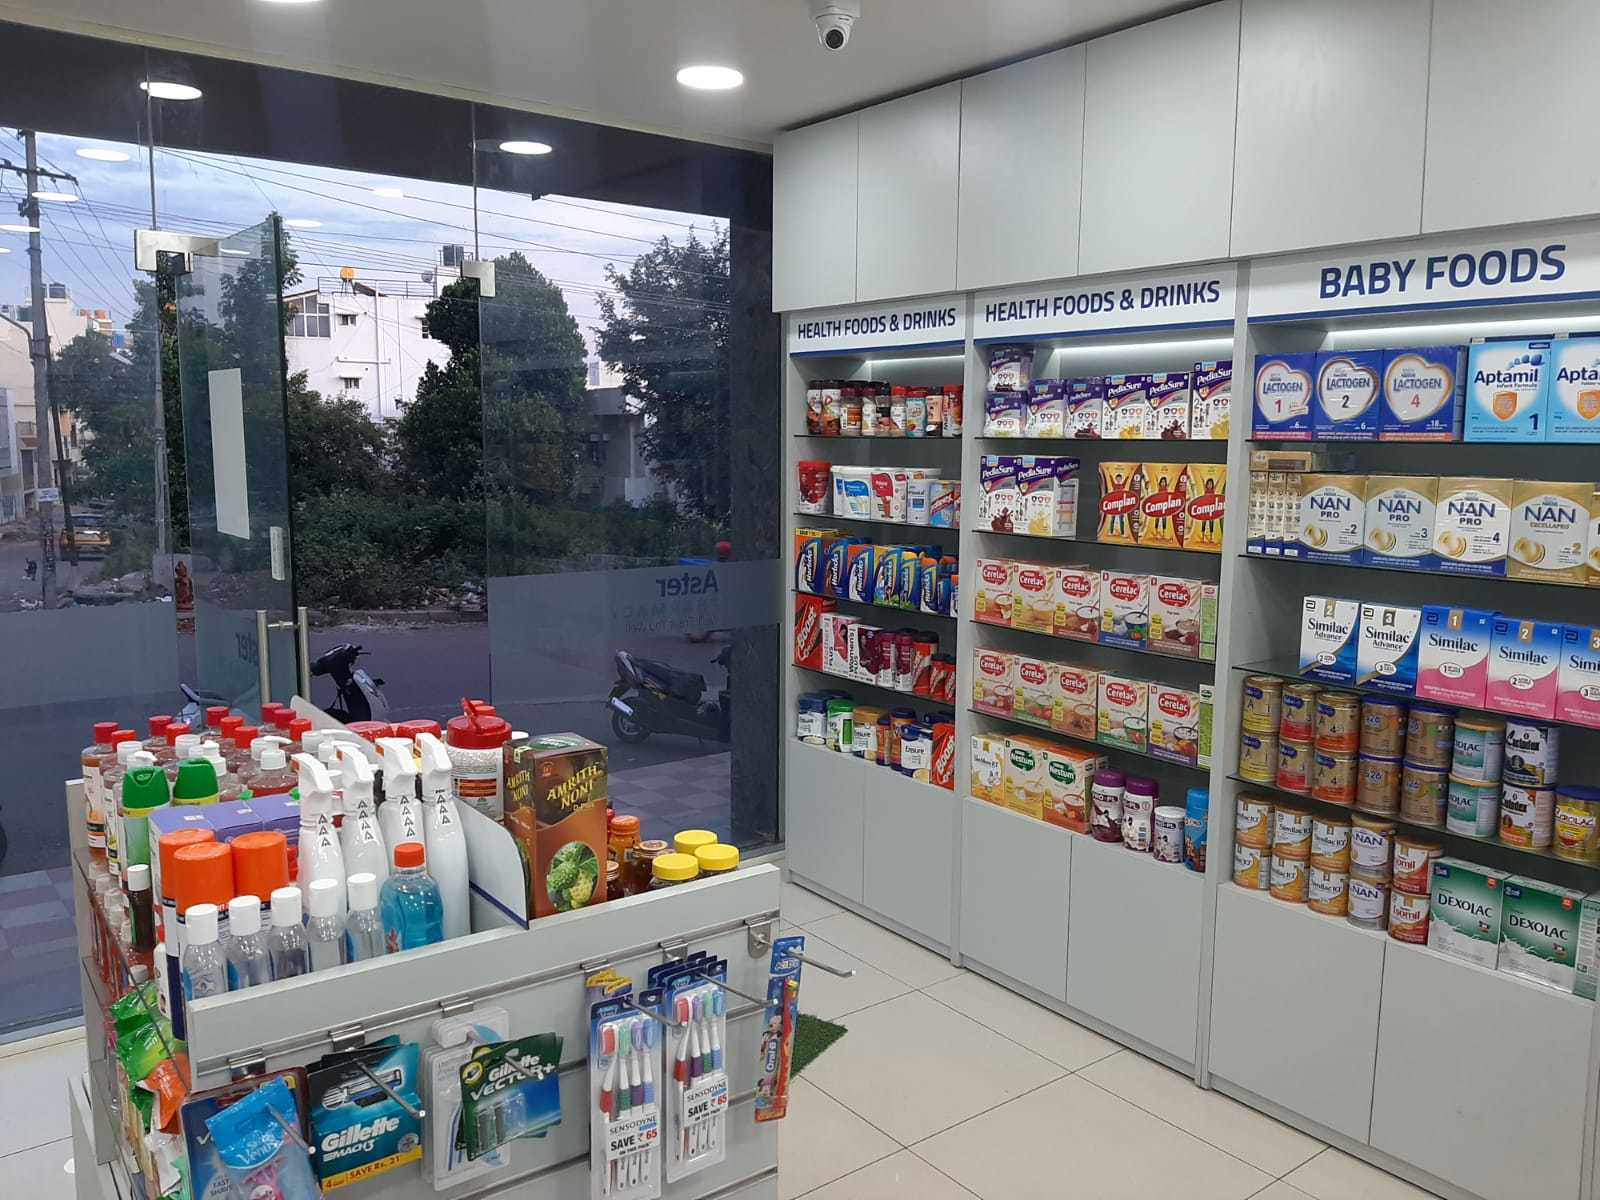 Aster Pharmacy in D-Group Layout, Bangalore